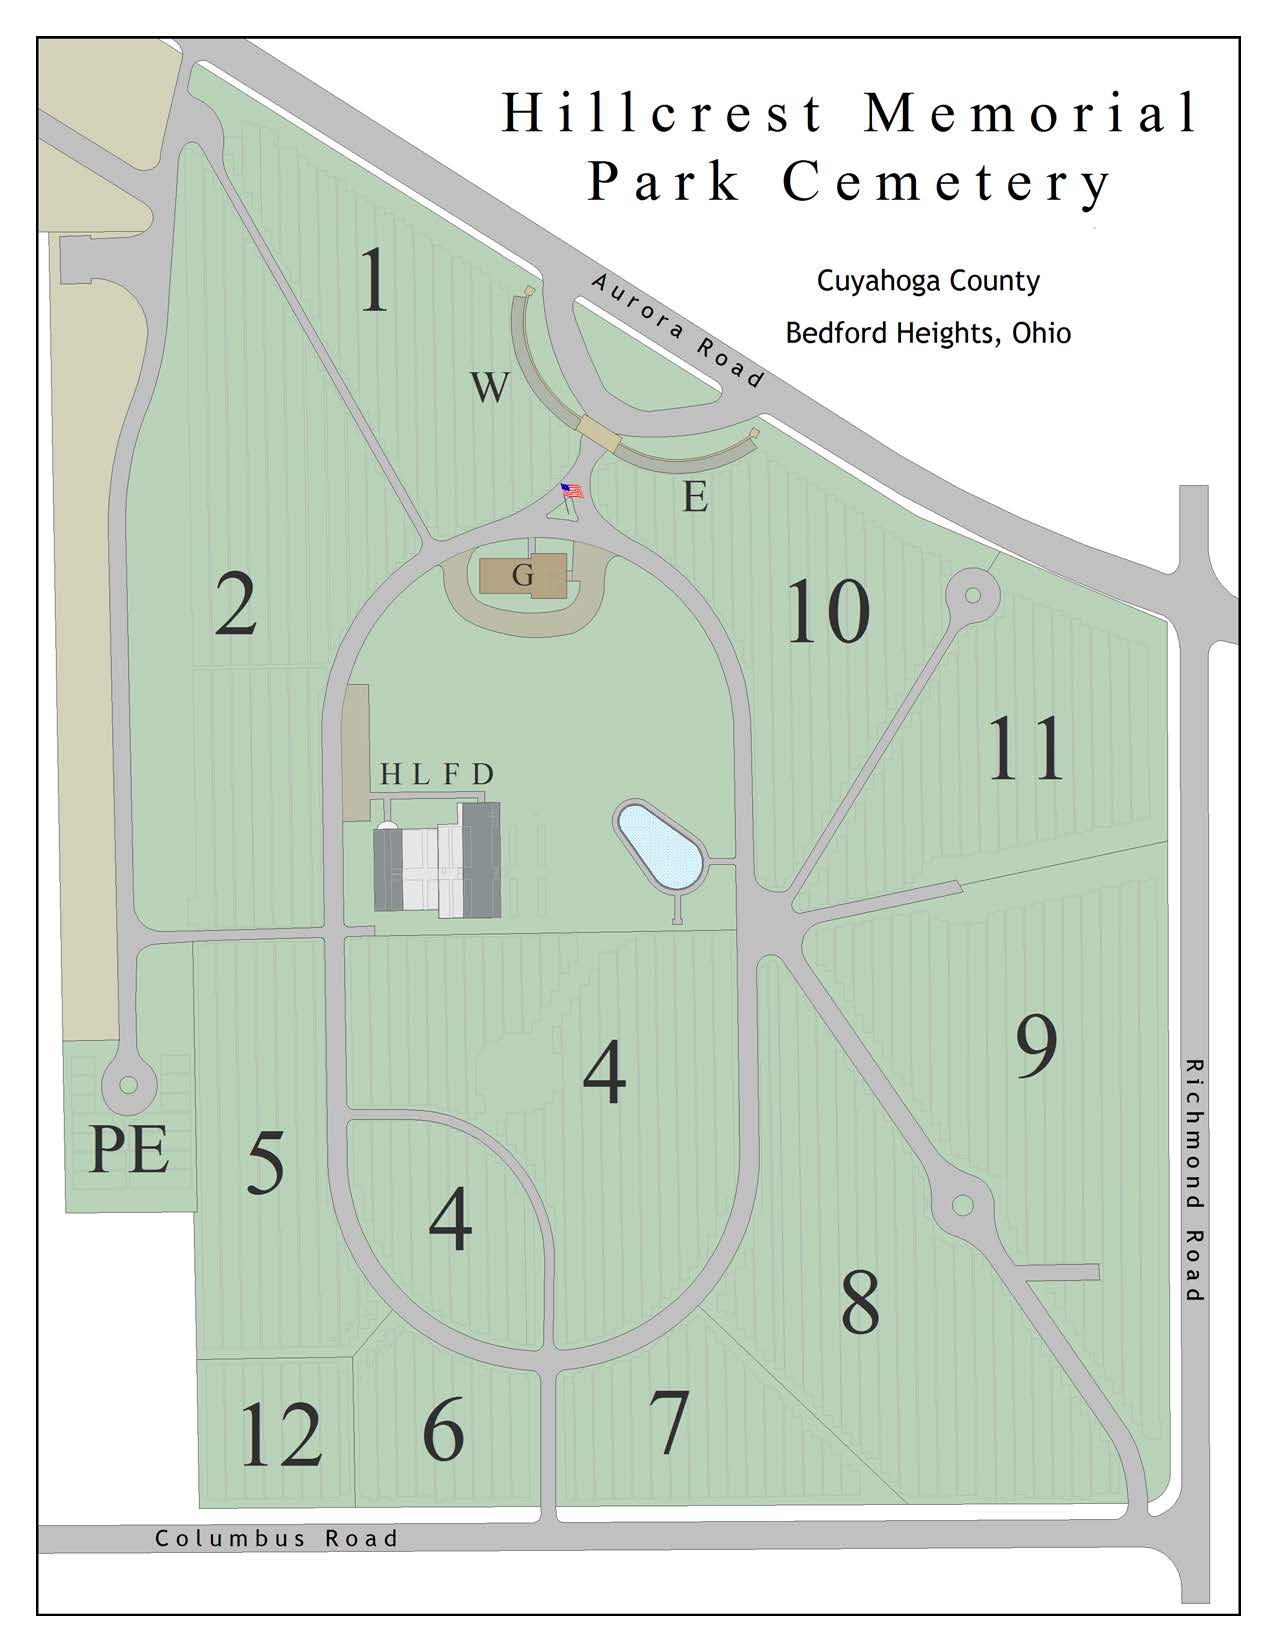 Map of Hillcrest Memorial Park Cemetery in Bedford Heights in Ohio